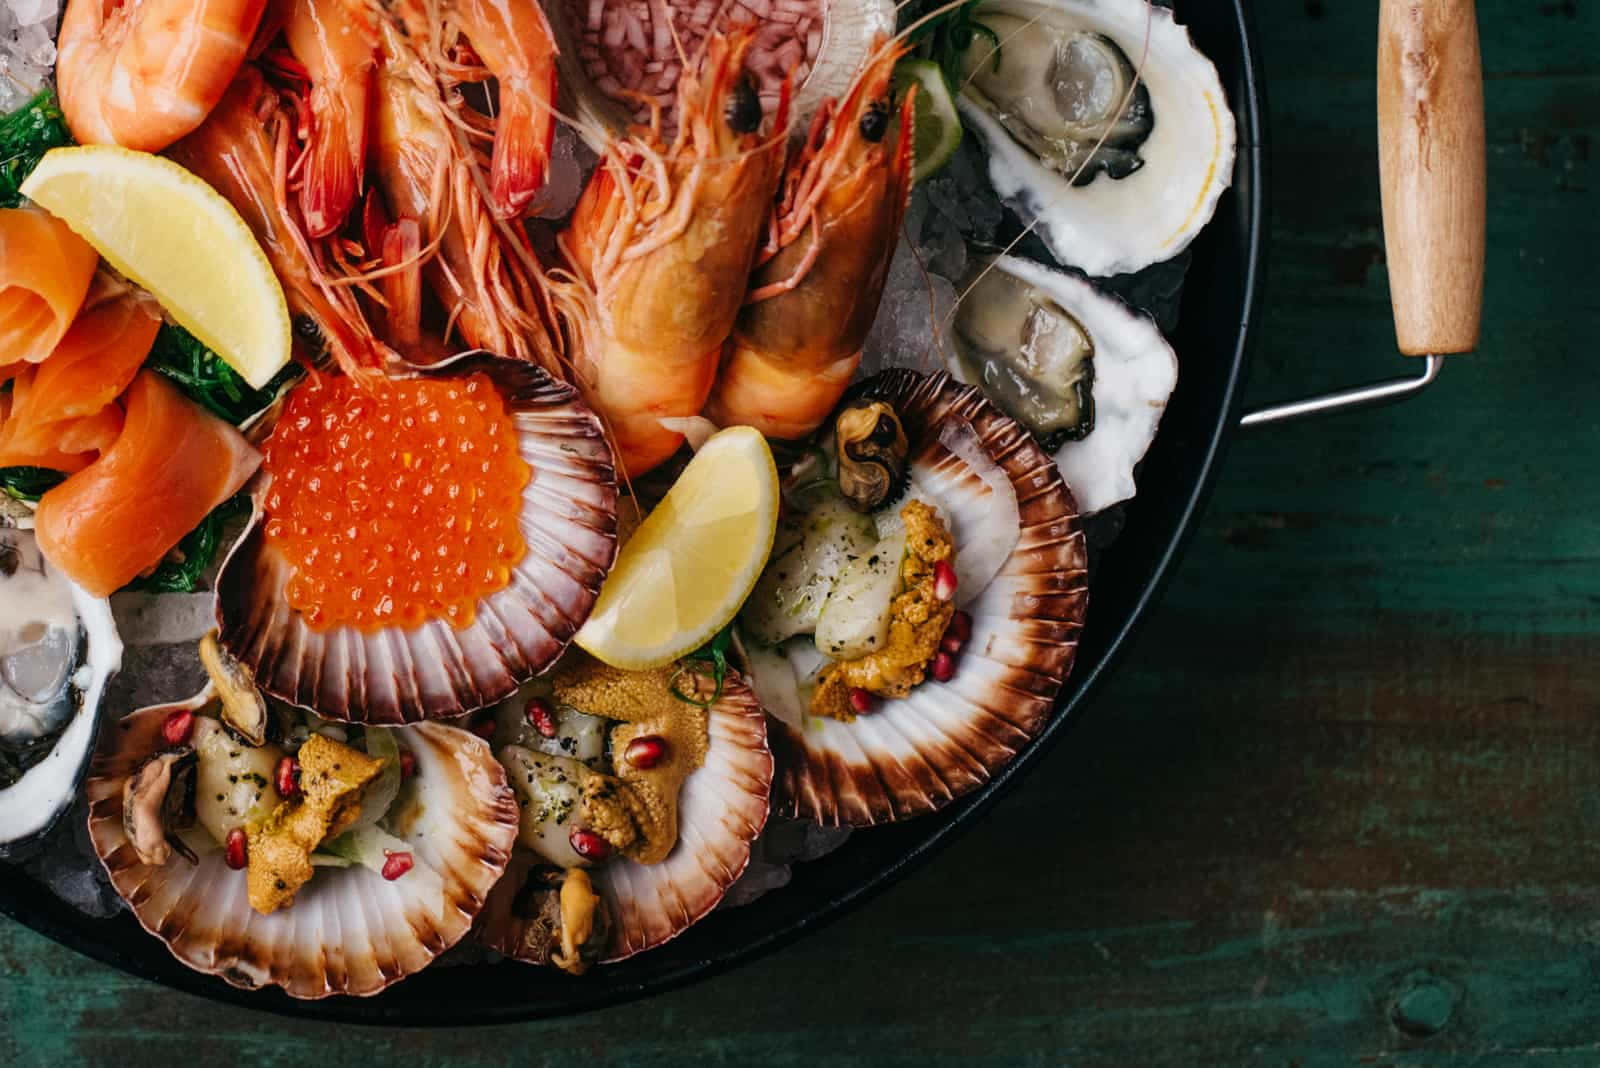 Enjoy fresh seafood any time with this selection of popular offerings